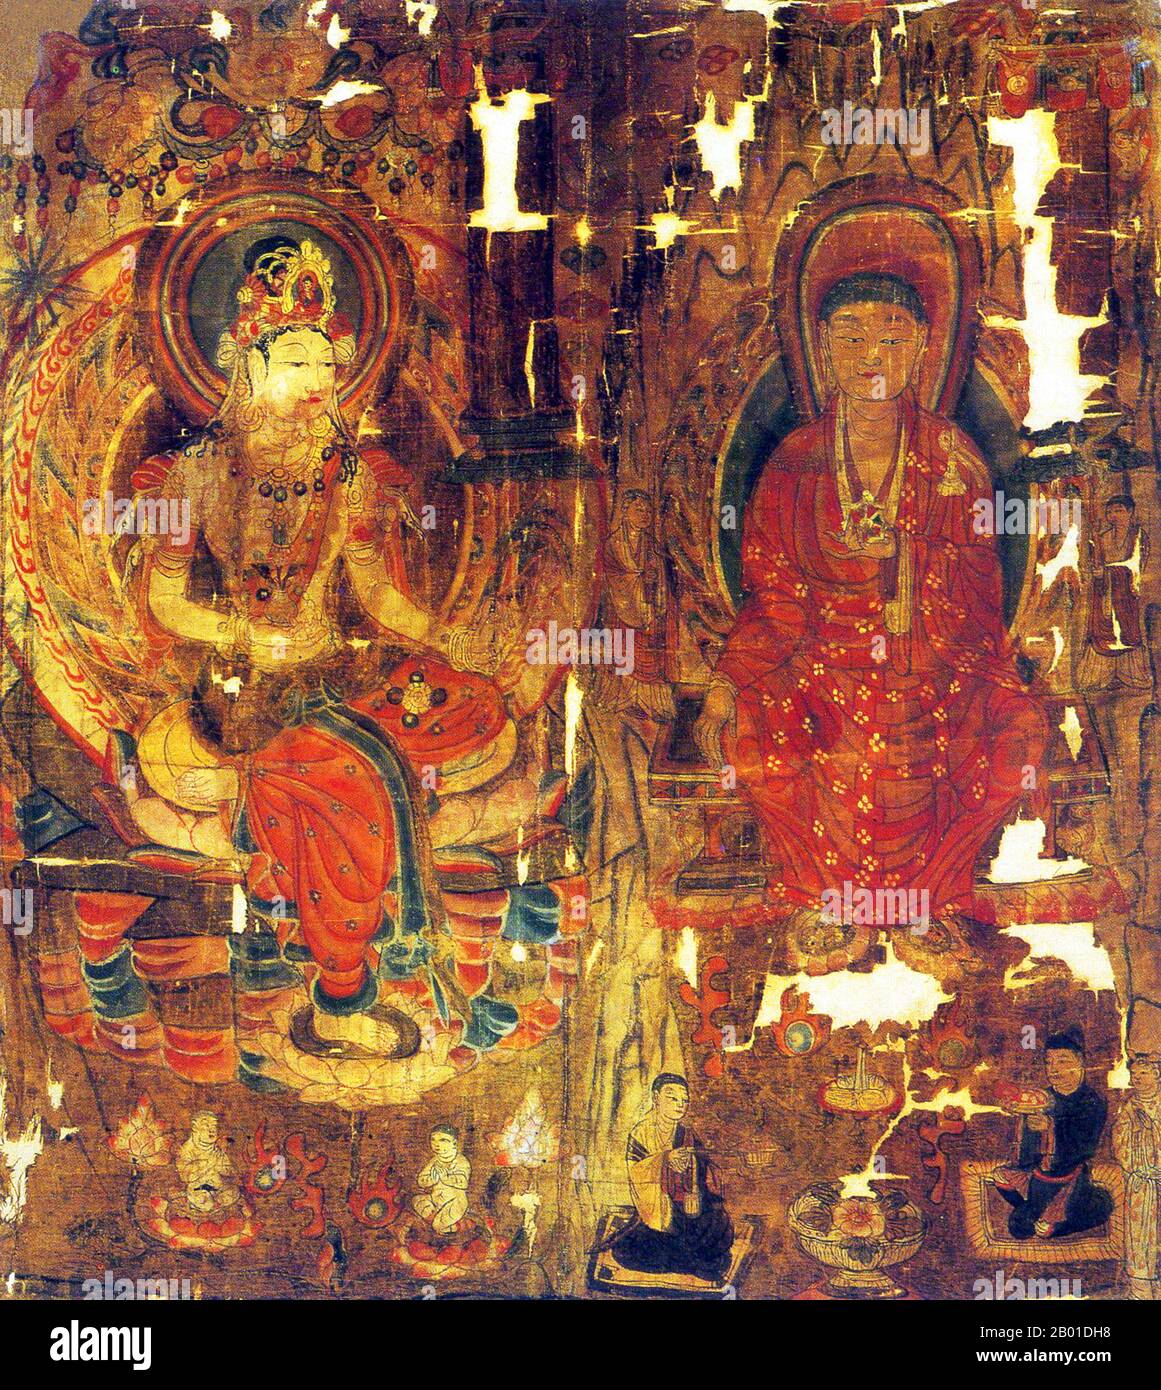 China: Guanyin 'Goddess of Mercy' and a bodhisattva with monks and worshippers, silk painting, Mogao Caves, Dunhuang, Five Dynasties period (907-960 CE).  The Mogao Caves, or Mogao Grottoes (Chinese: mògāo kū, also known as the Caves of the Thousand Buddhas and Dunhuang Caves) form a system of 492 temples 25 km (15.5 miles) southeast of the center of Dunhuang, an oasis strategically located at a religious and cultural crossroads on the Silk Road, in Gansu province, China.  The caves contain some of the finest examples of Buddhist art spanning a period of 1,000 years. Stock Photo